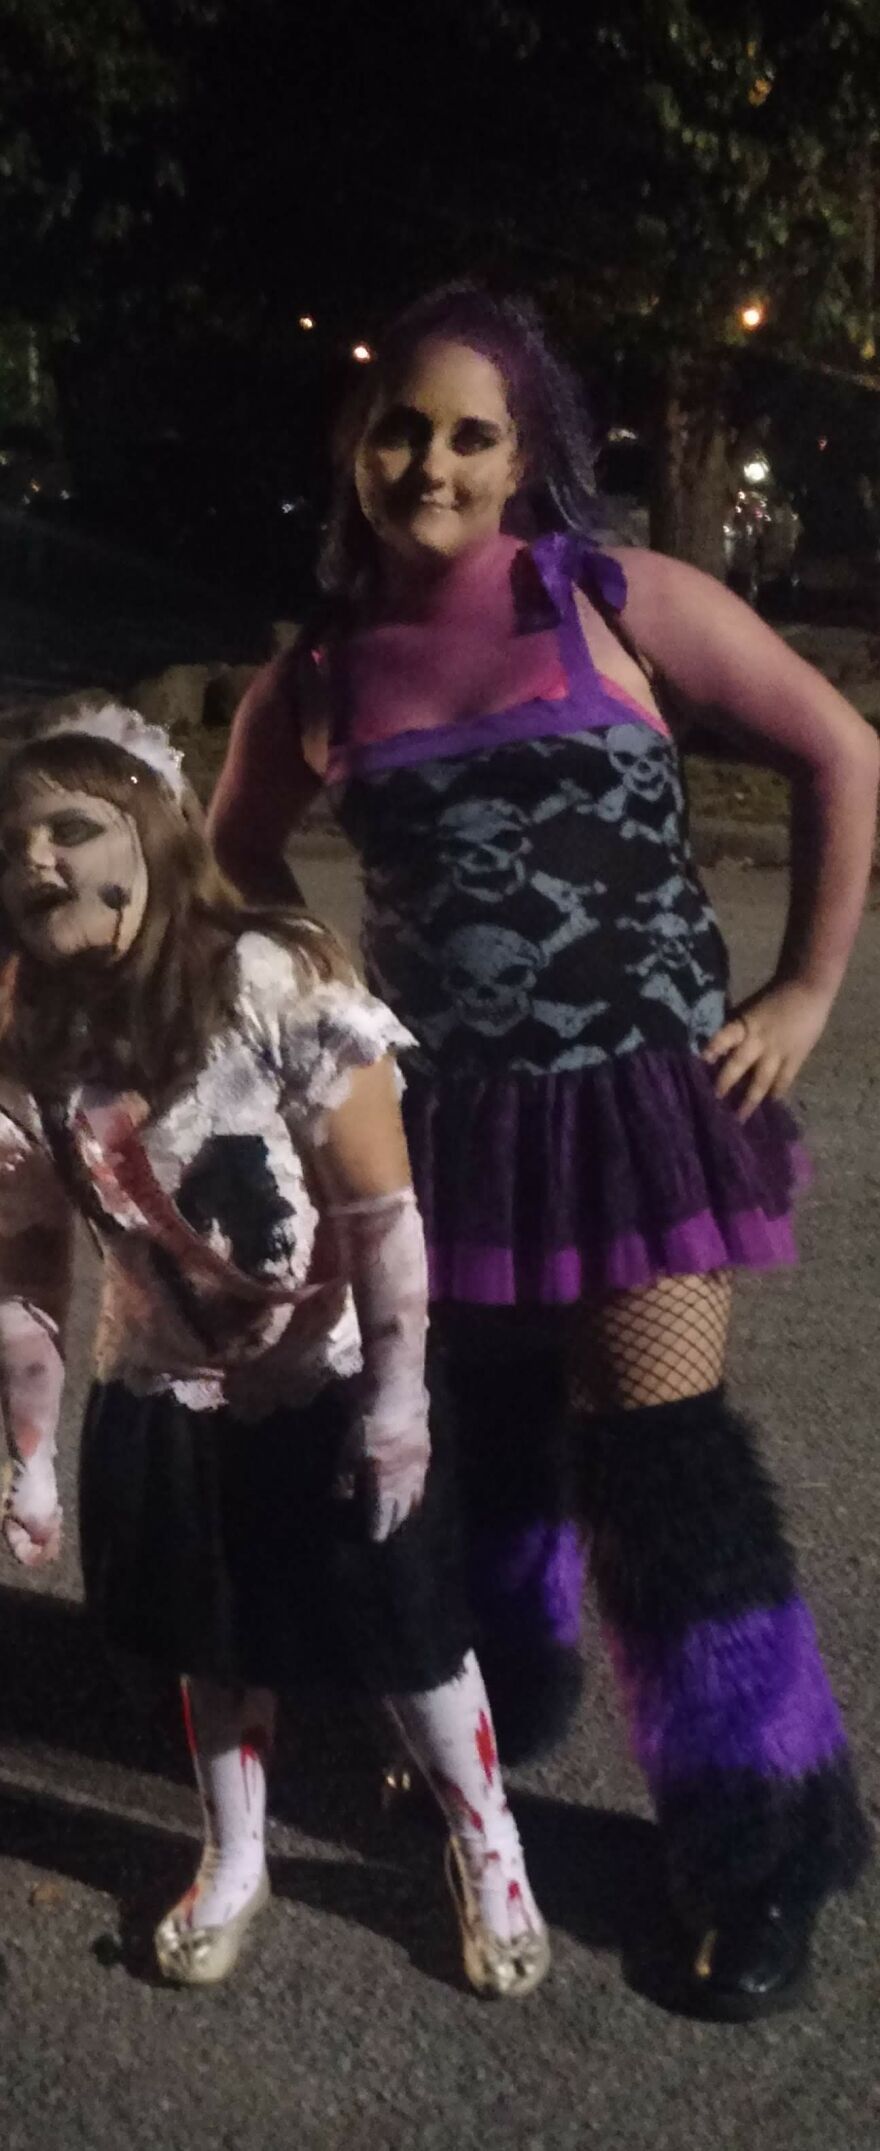 Last Halloween Costume Pic Lol... Throw Back To 2015 When My Oldest Daughter Was A Cyber Goth Chick And My Youngest Was A Zombie Prom Queen(She Came Up With That Name)